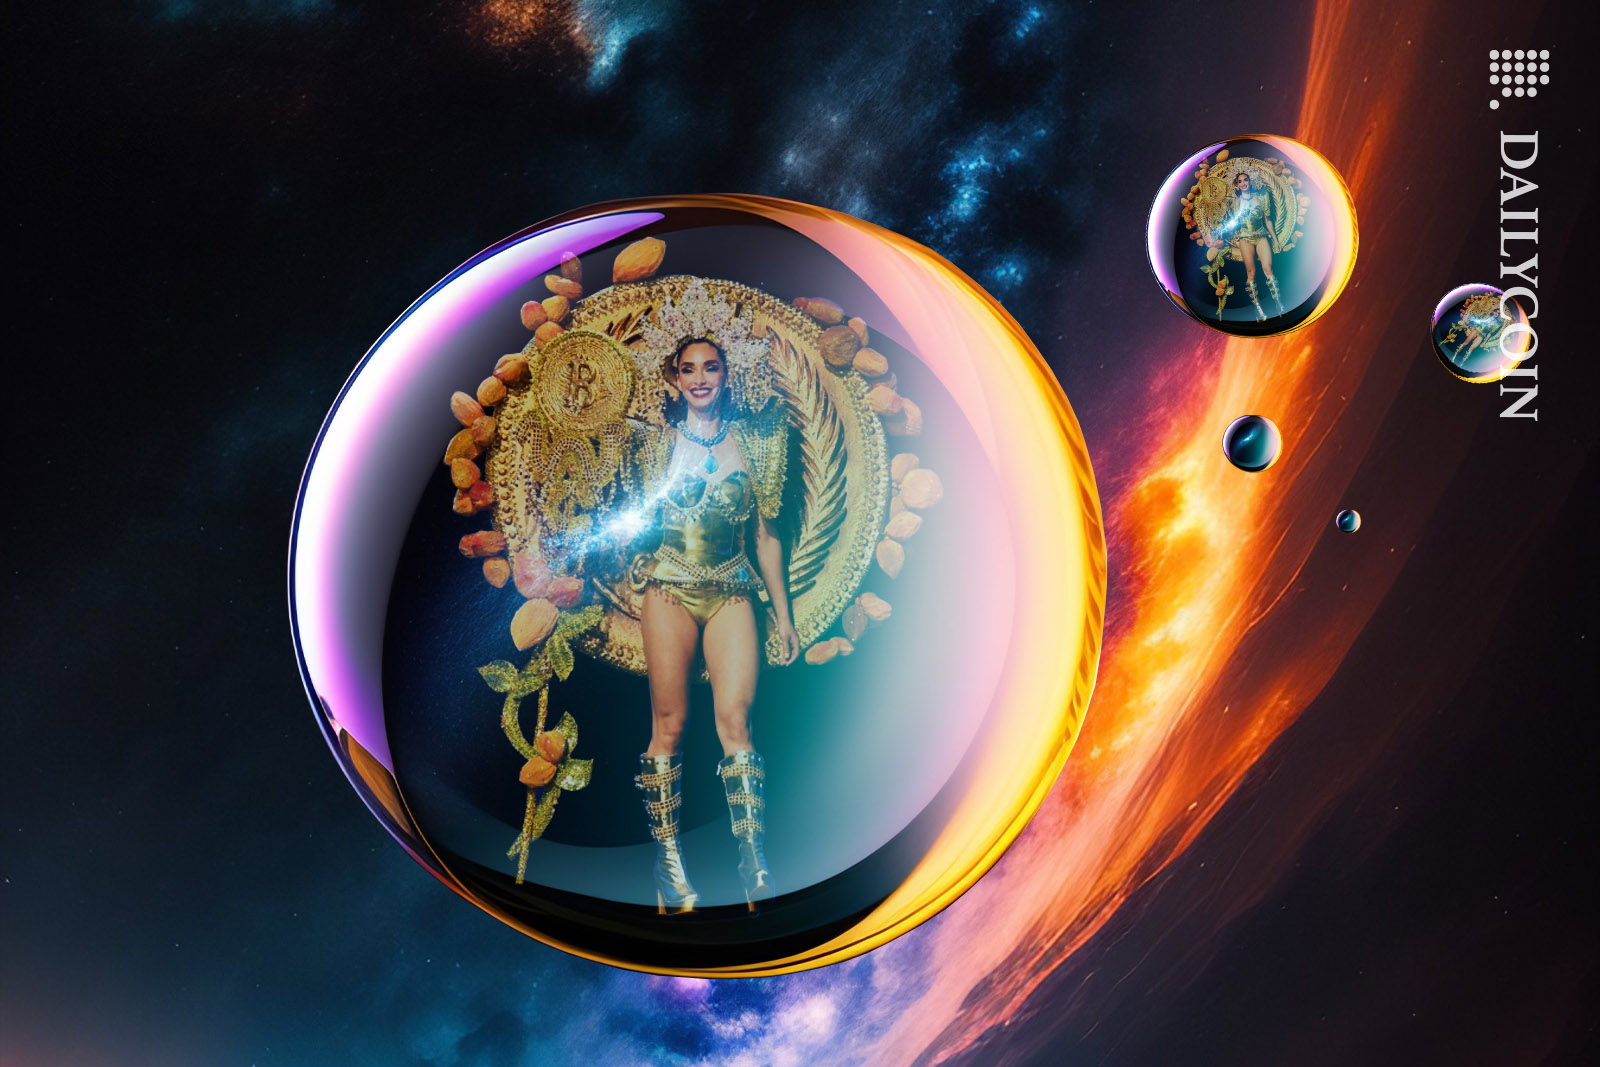 Miss El Salvador wearing a golden Bitcoin outfit trapped in a bubble floating in outer space.